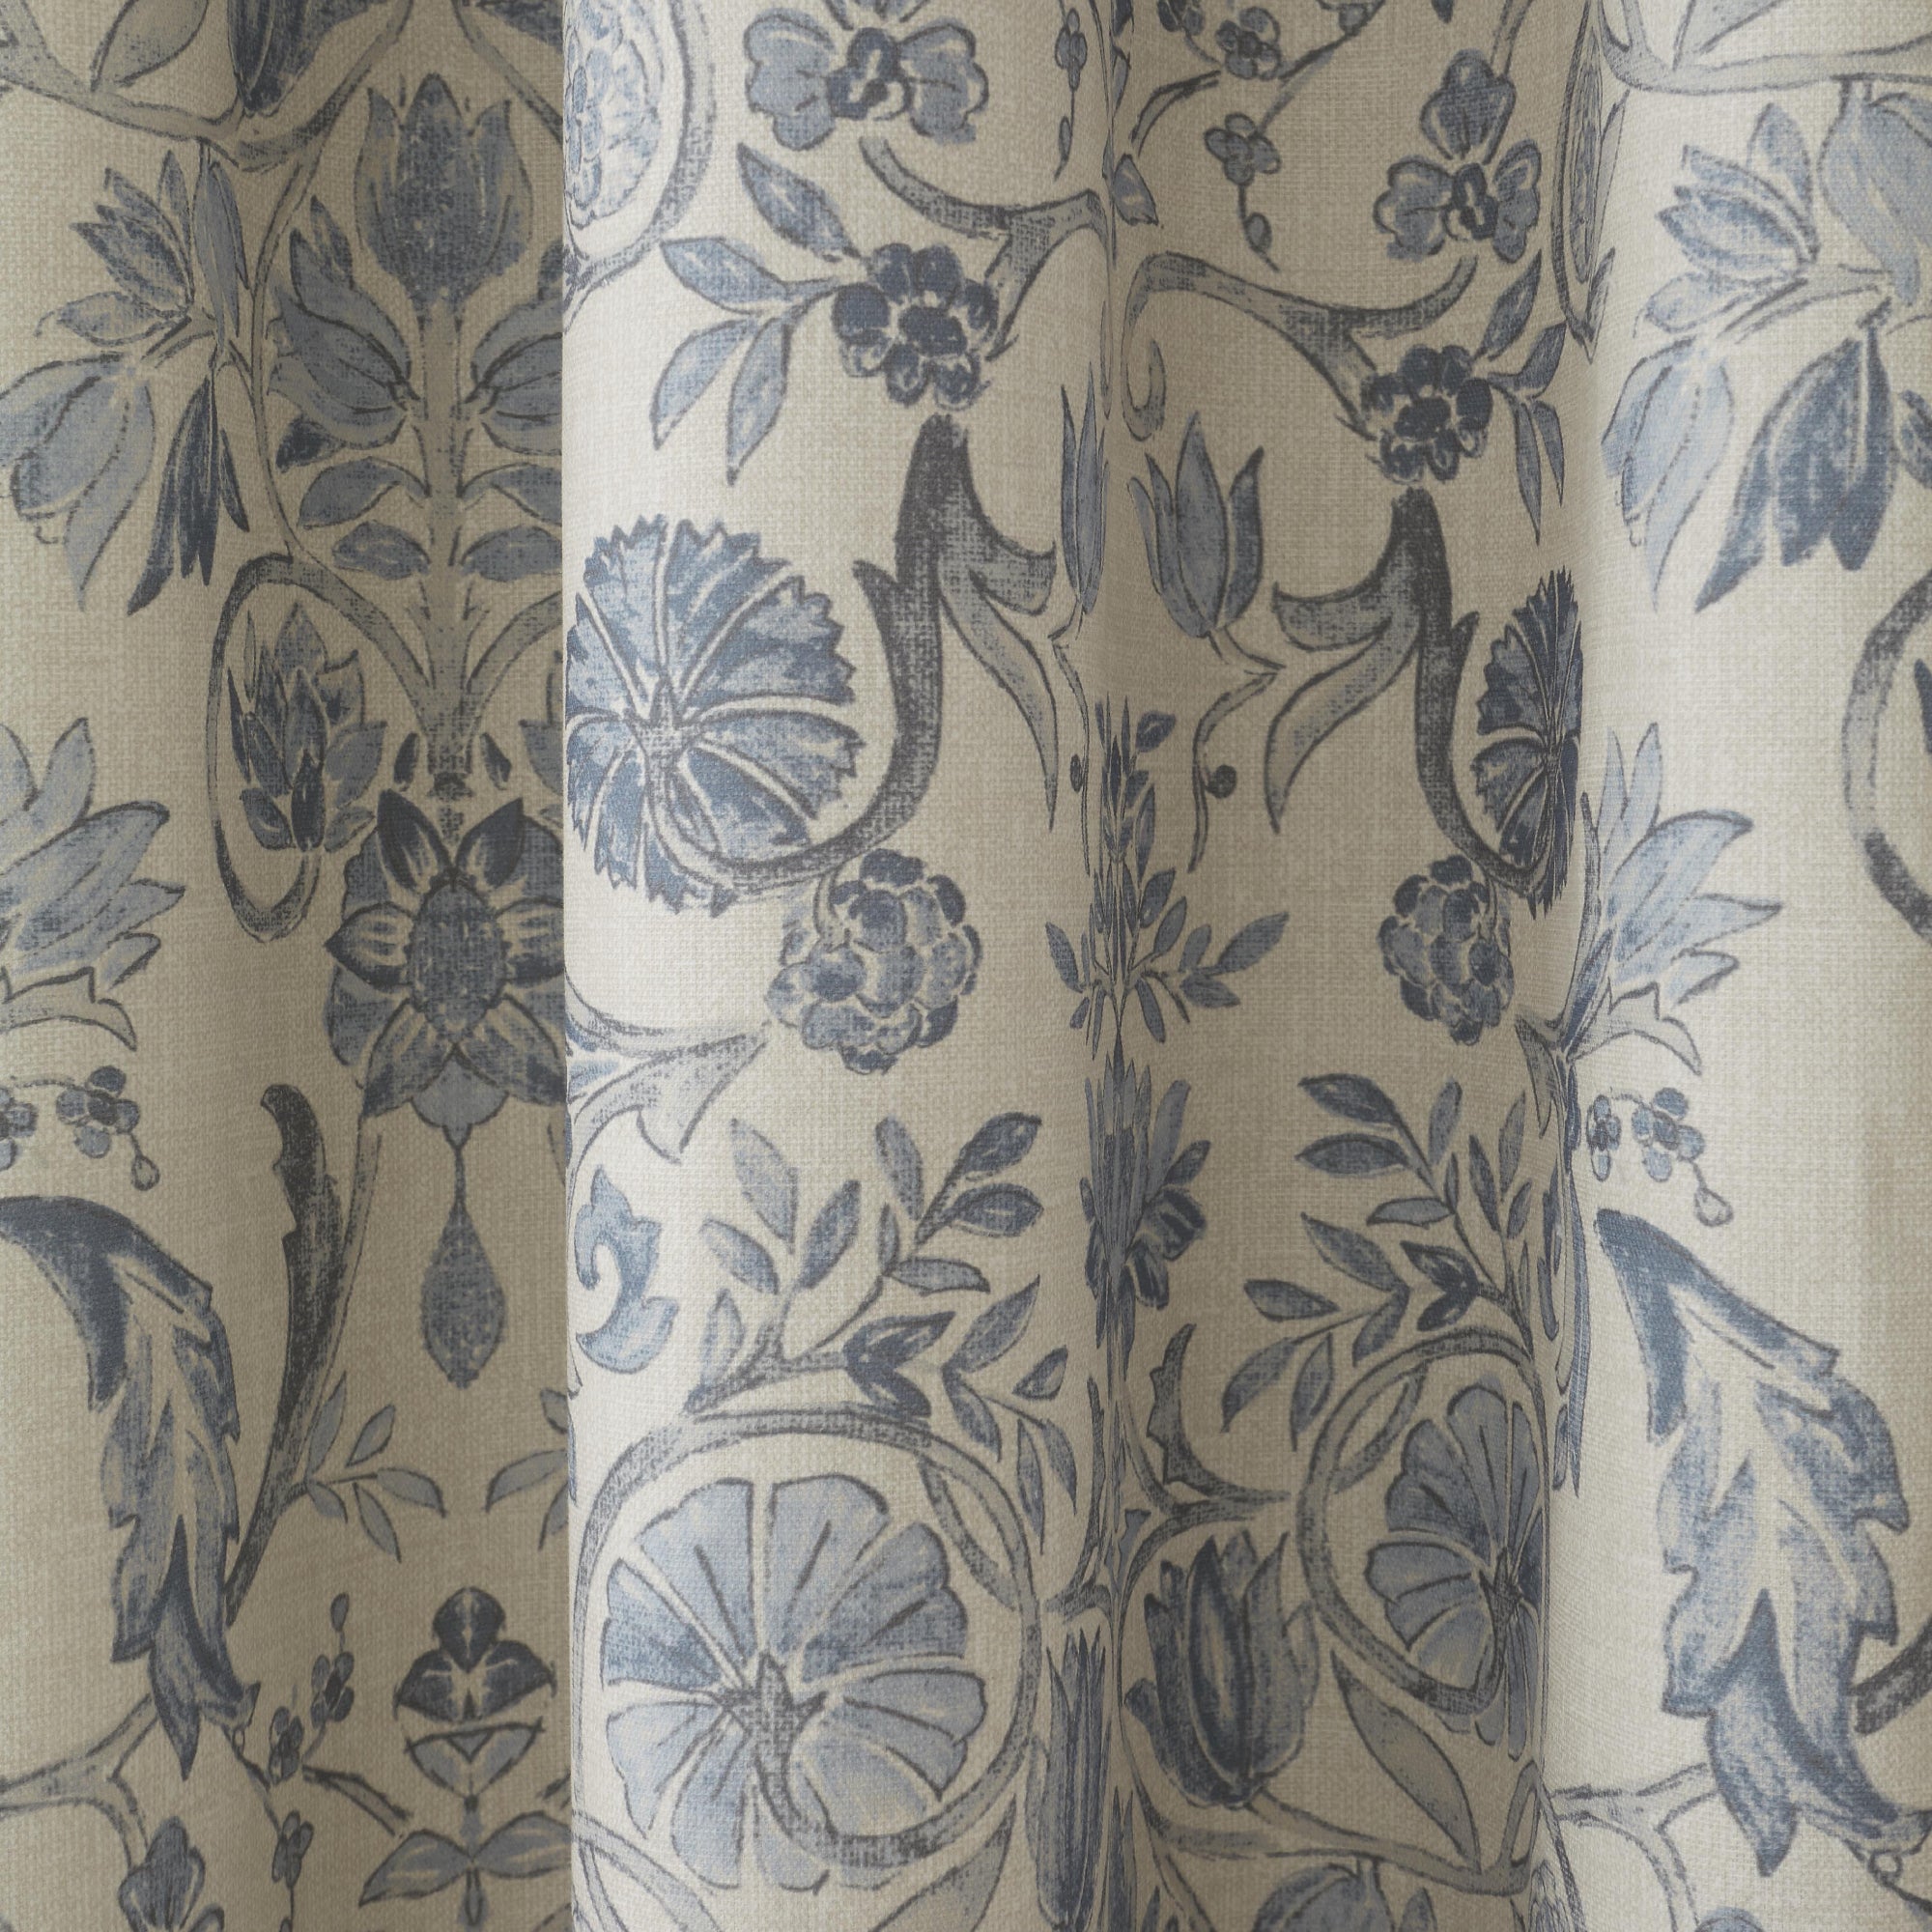 Pair of Pencil Pleat Curtains With Tie-Backs Averie by Dreams & Drapes Design in Blue